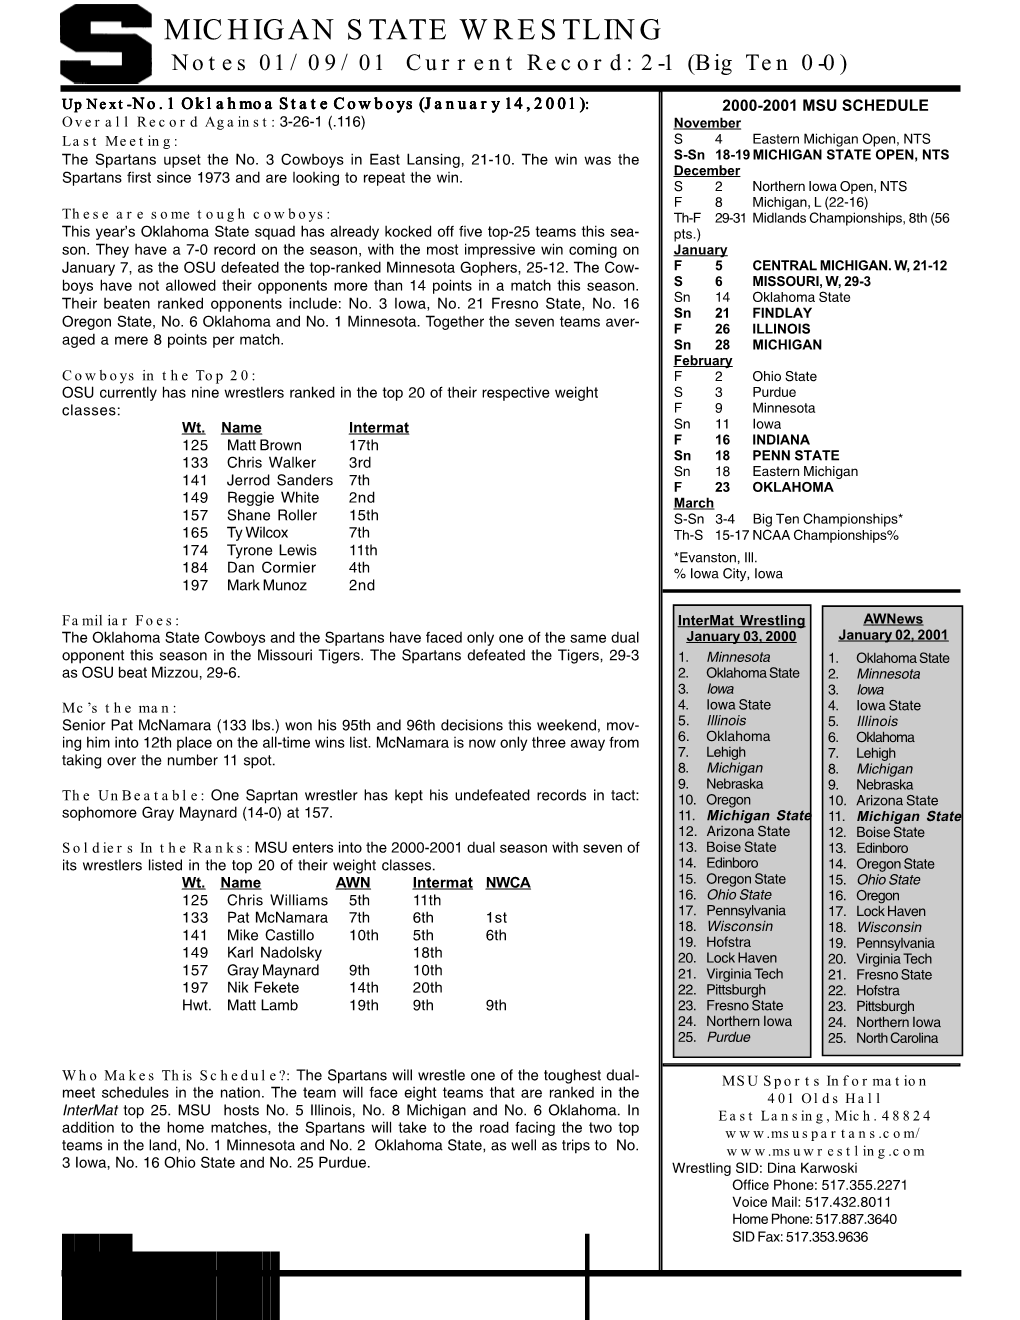 MICHIGAN STATE WRESTLING Notes 01/09/01 Current Record: 2-1 (Big Ten 0-0)